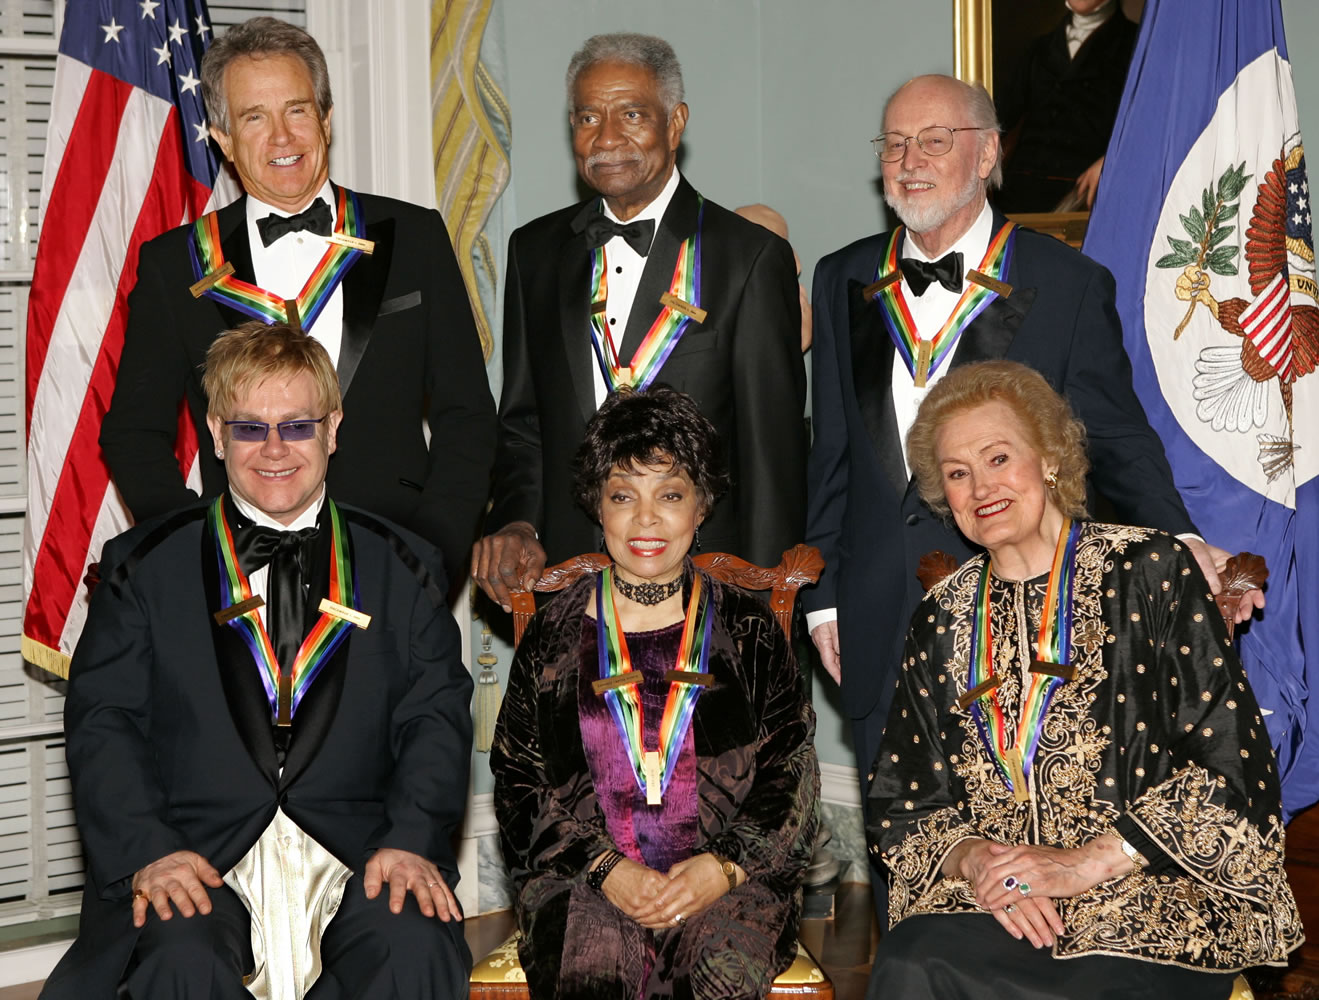 Recipients of the 27th annual Kennedy Center Honors, front, from left, singer and composer Elton John, actress Ruby Dee, and soprano Joan Sutherland; and, rear, from left, actor, producer, writer and director Warren Beatty, actor, writer and producer Ossie Davis, and composer and conductor John Williams, pose for a group photo following the 2004 dinner celebrating their lifetime achievements in the arts, at the State Department in Washington.